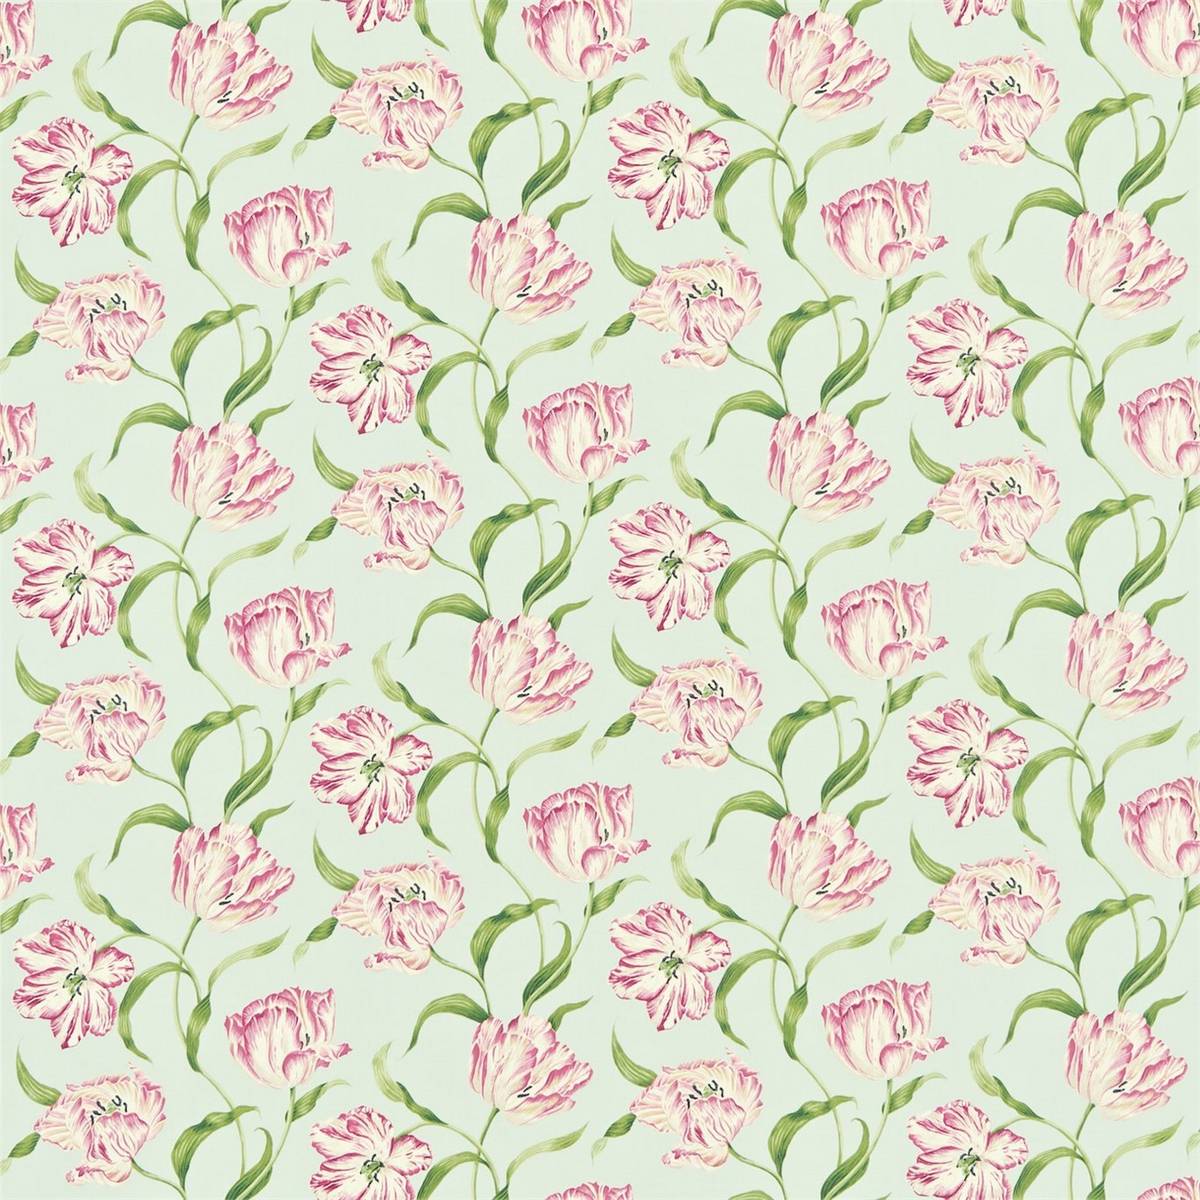 Dancing Tulips Blue/Pink Fabric by Sanderson